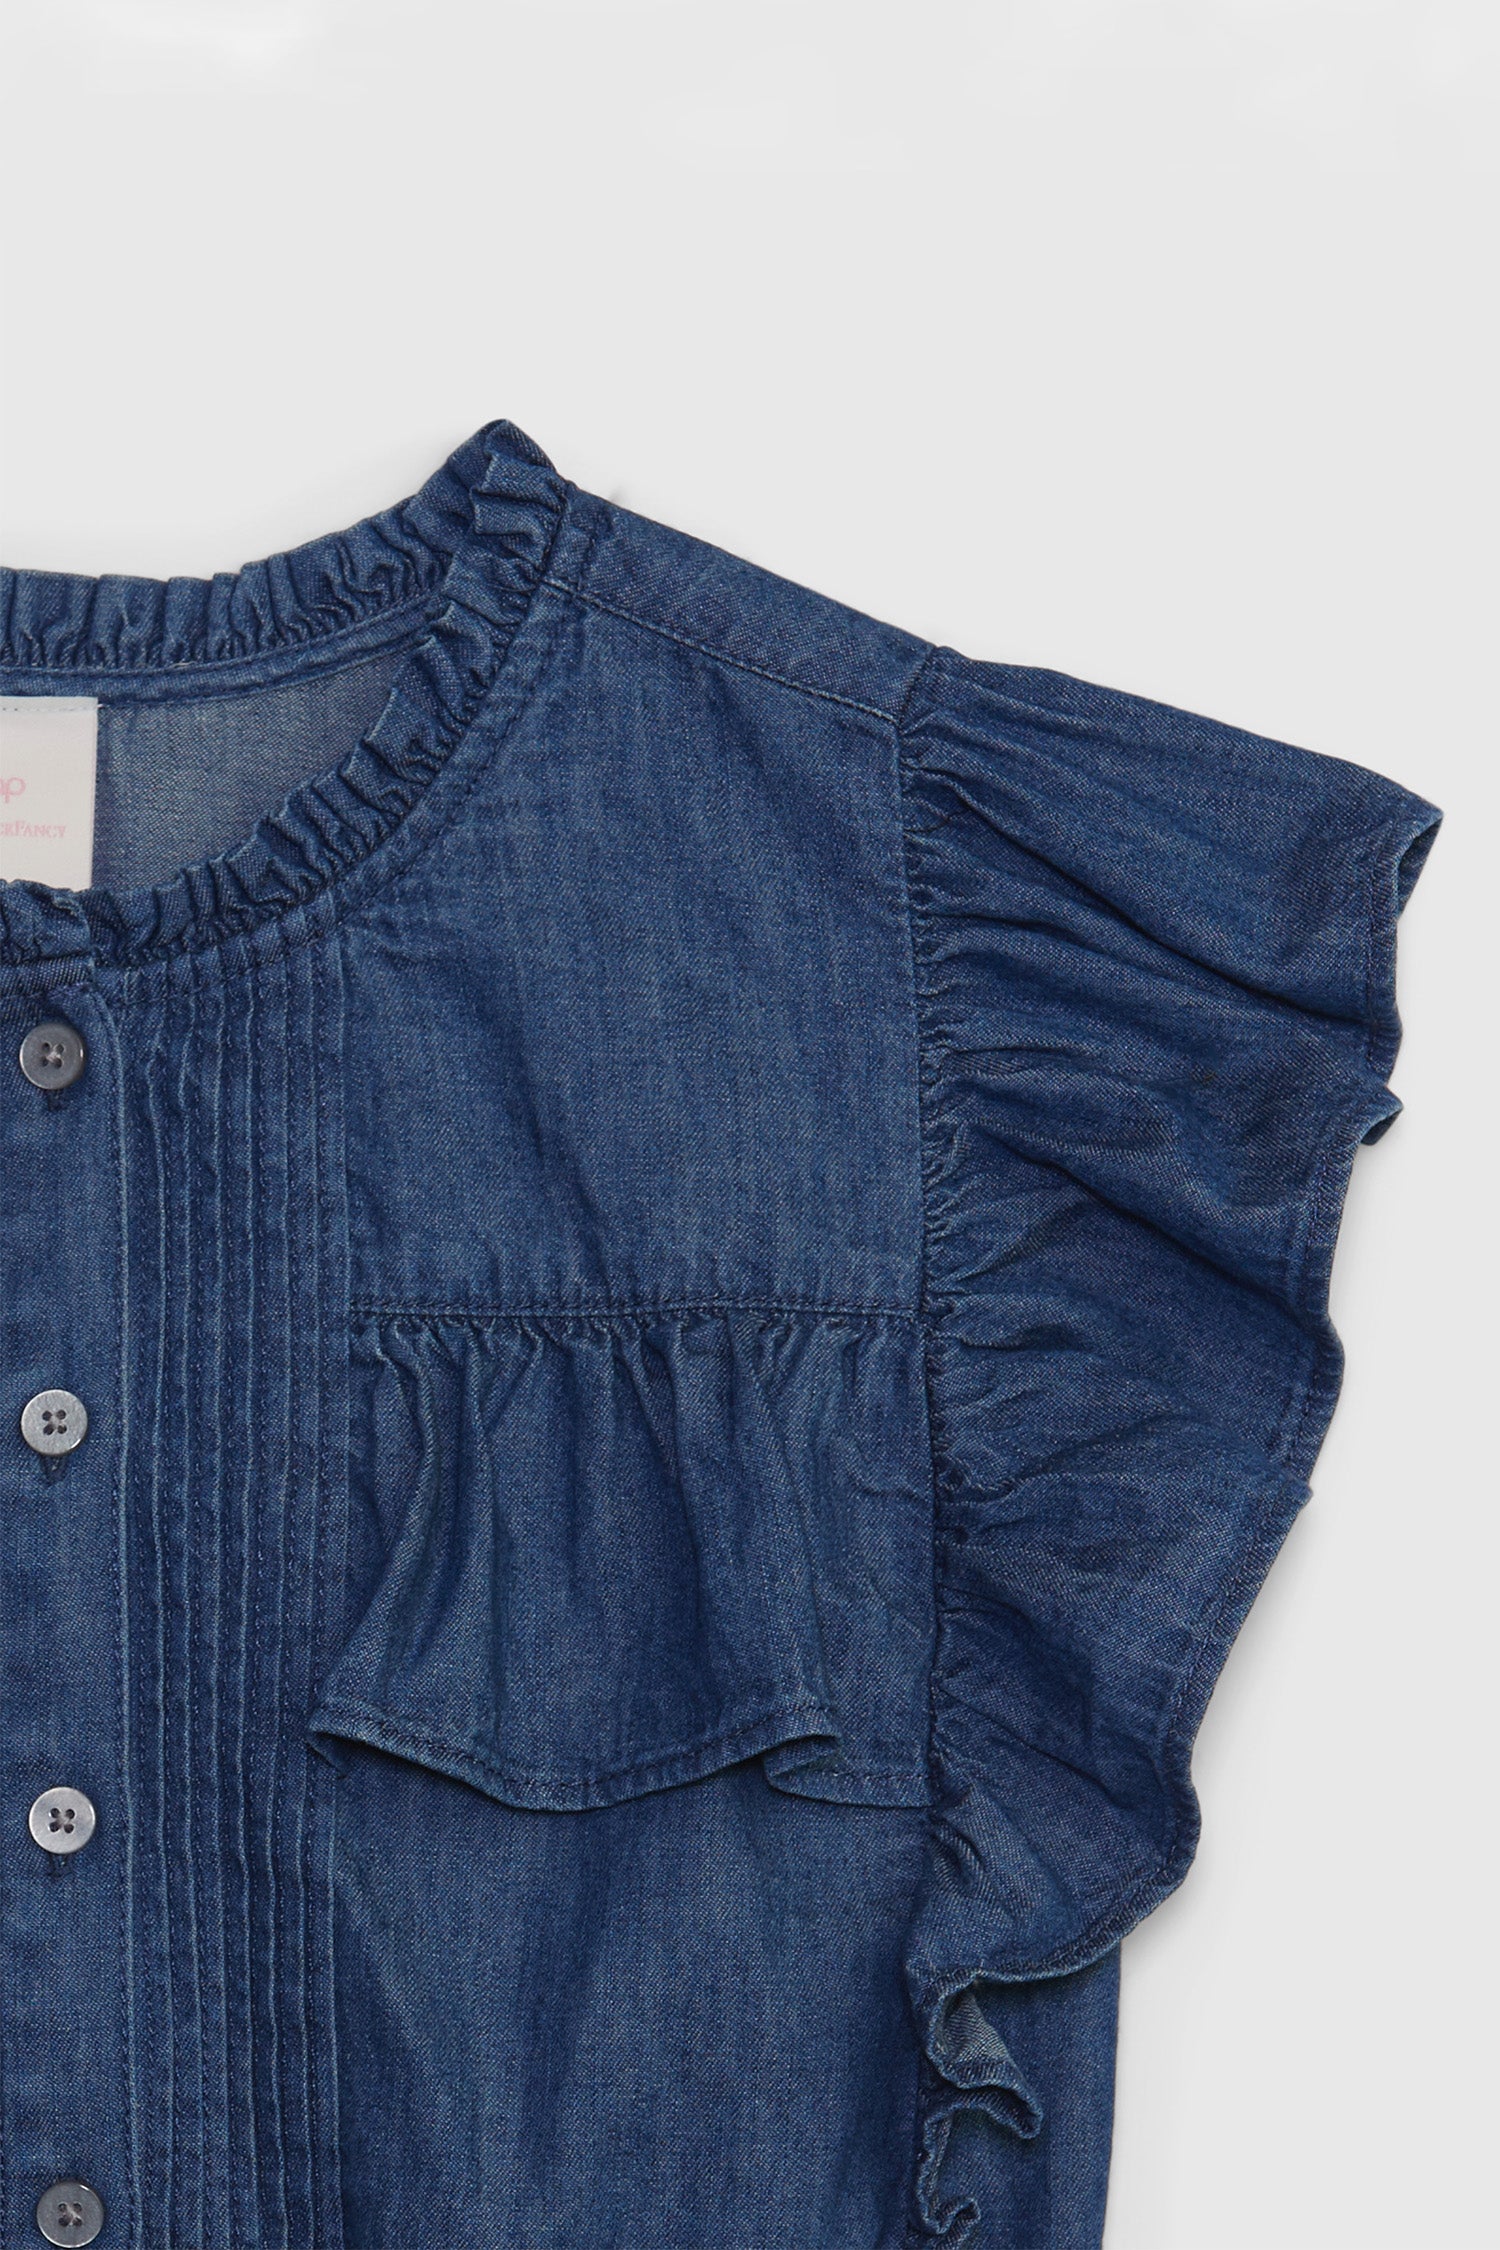 Close up image detailing kids denim ruffle top with buttons at front and ruffled short sleeves.